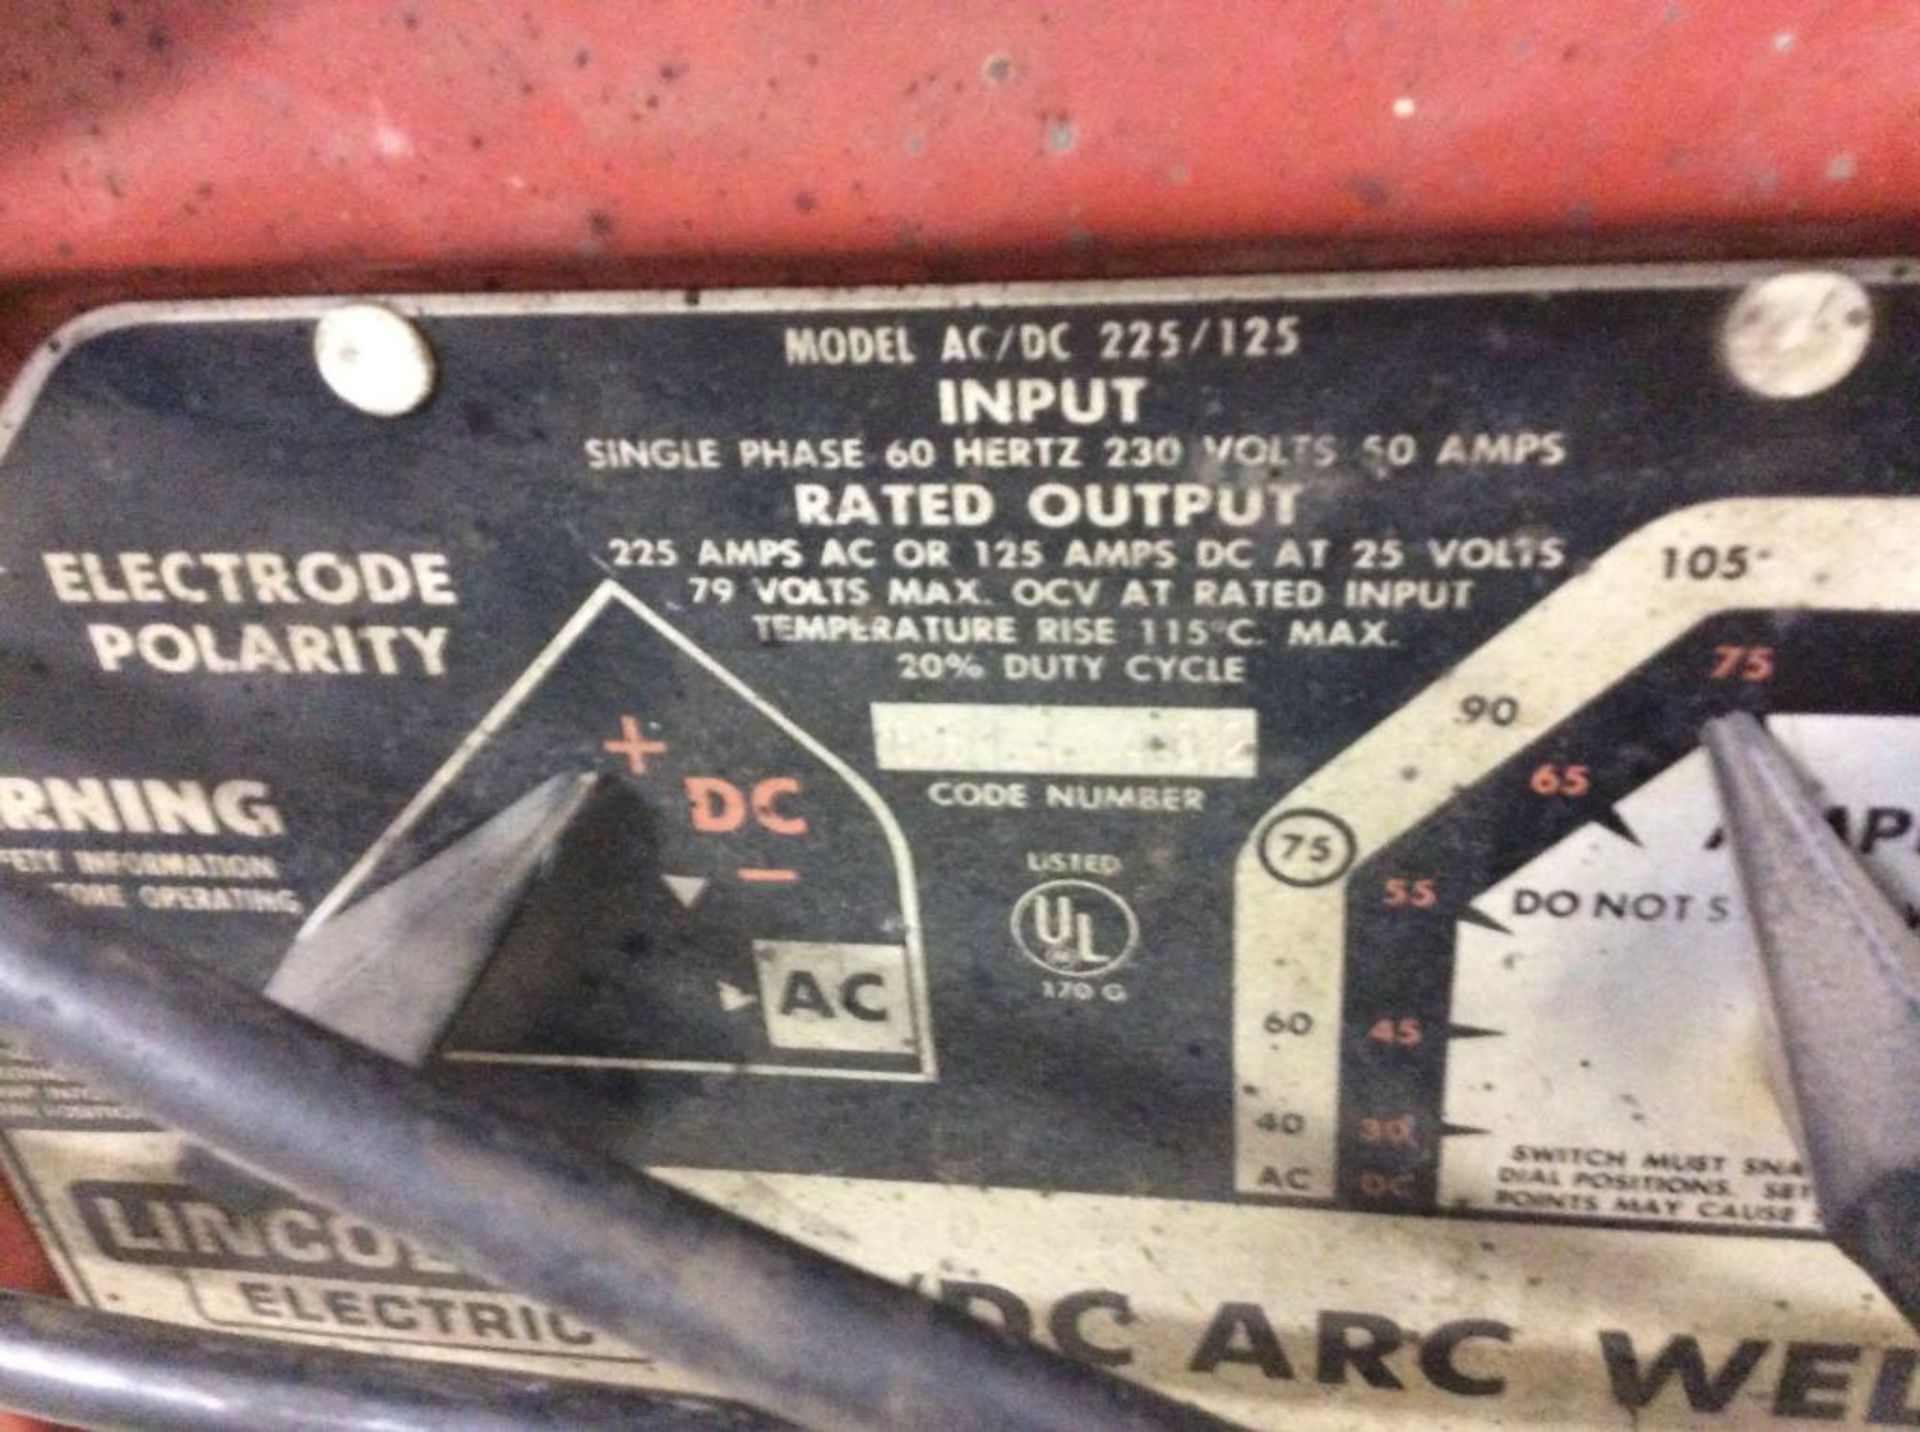 Lot contains (1) Lincoln AC/DC 225/125 electric arc welder with leathers, and (1) Sears, m/n 397.196 - Image 3 of 5